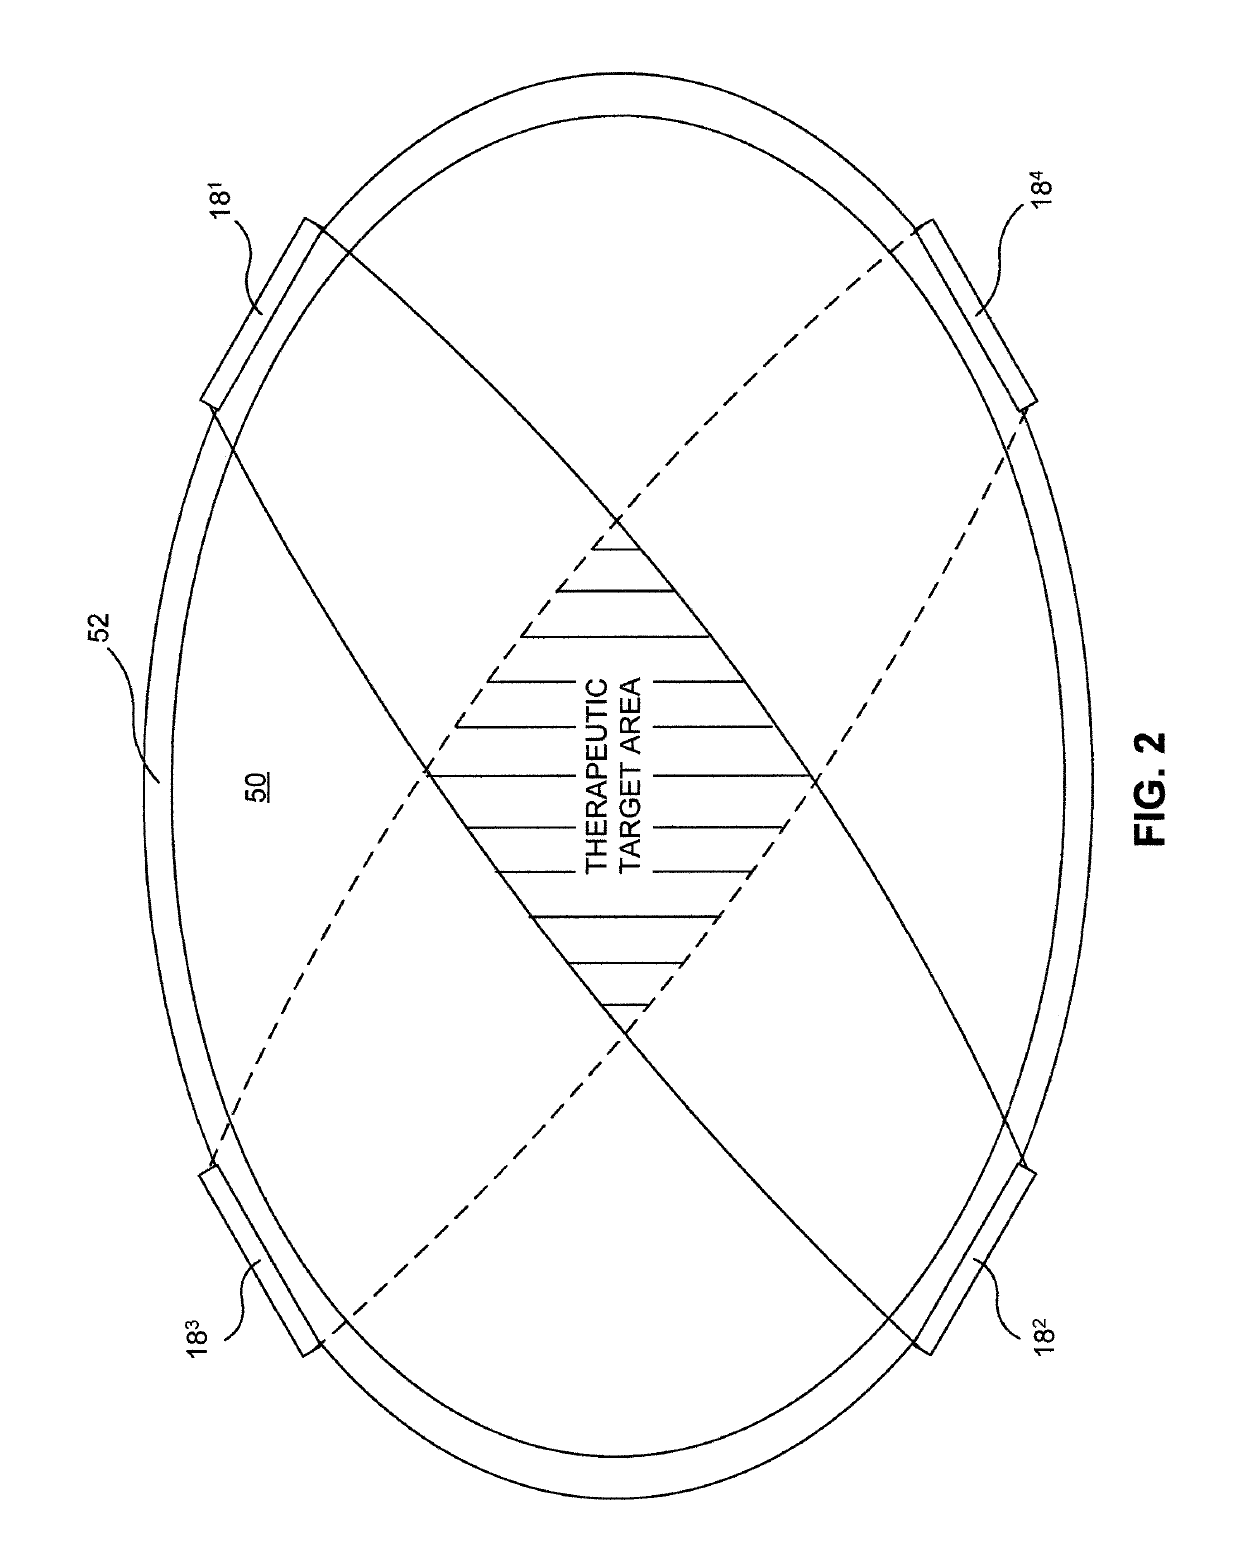 System and method employing interferential electrical stimulation to treat cardiac issues